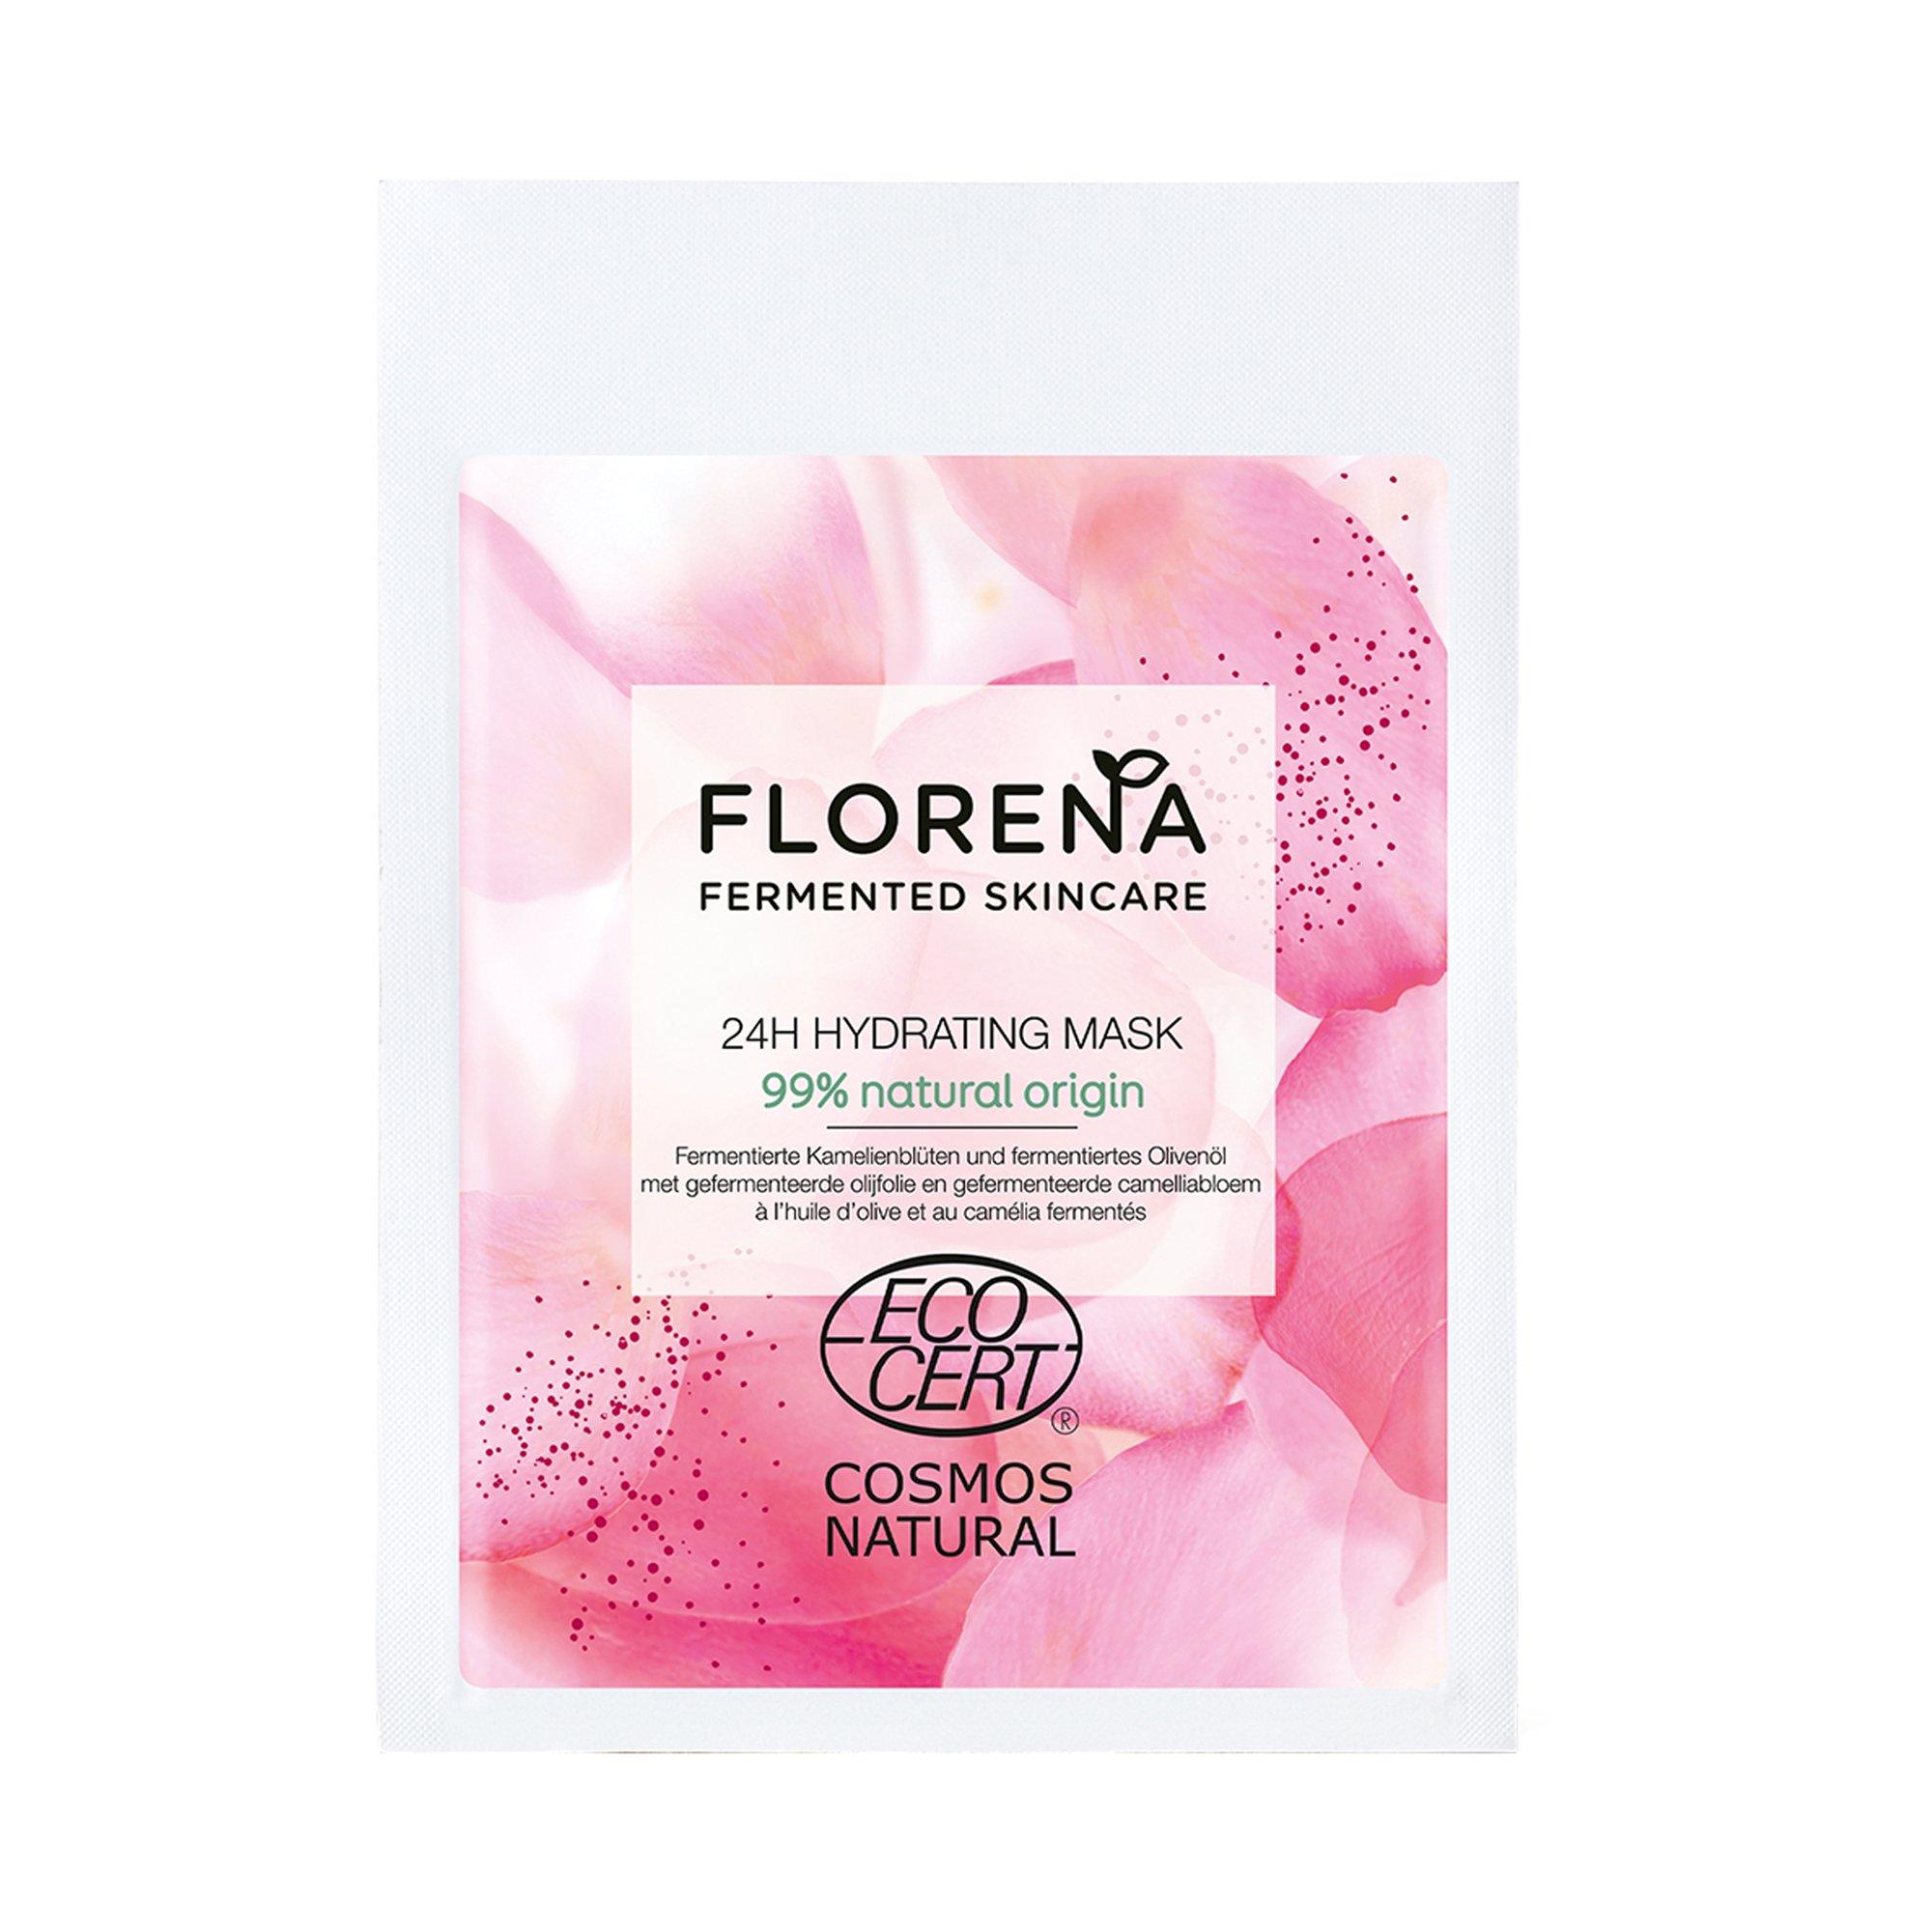 Image of Florena 24H Hydrating Mask Fermented Skincare 24H Hydrating Mask